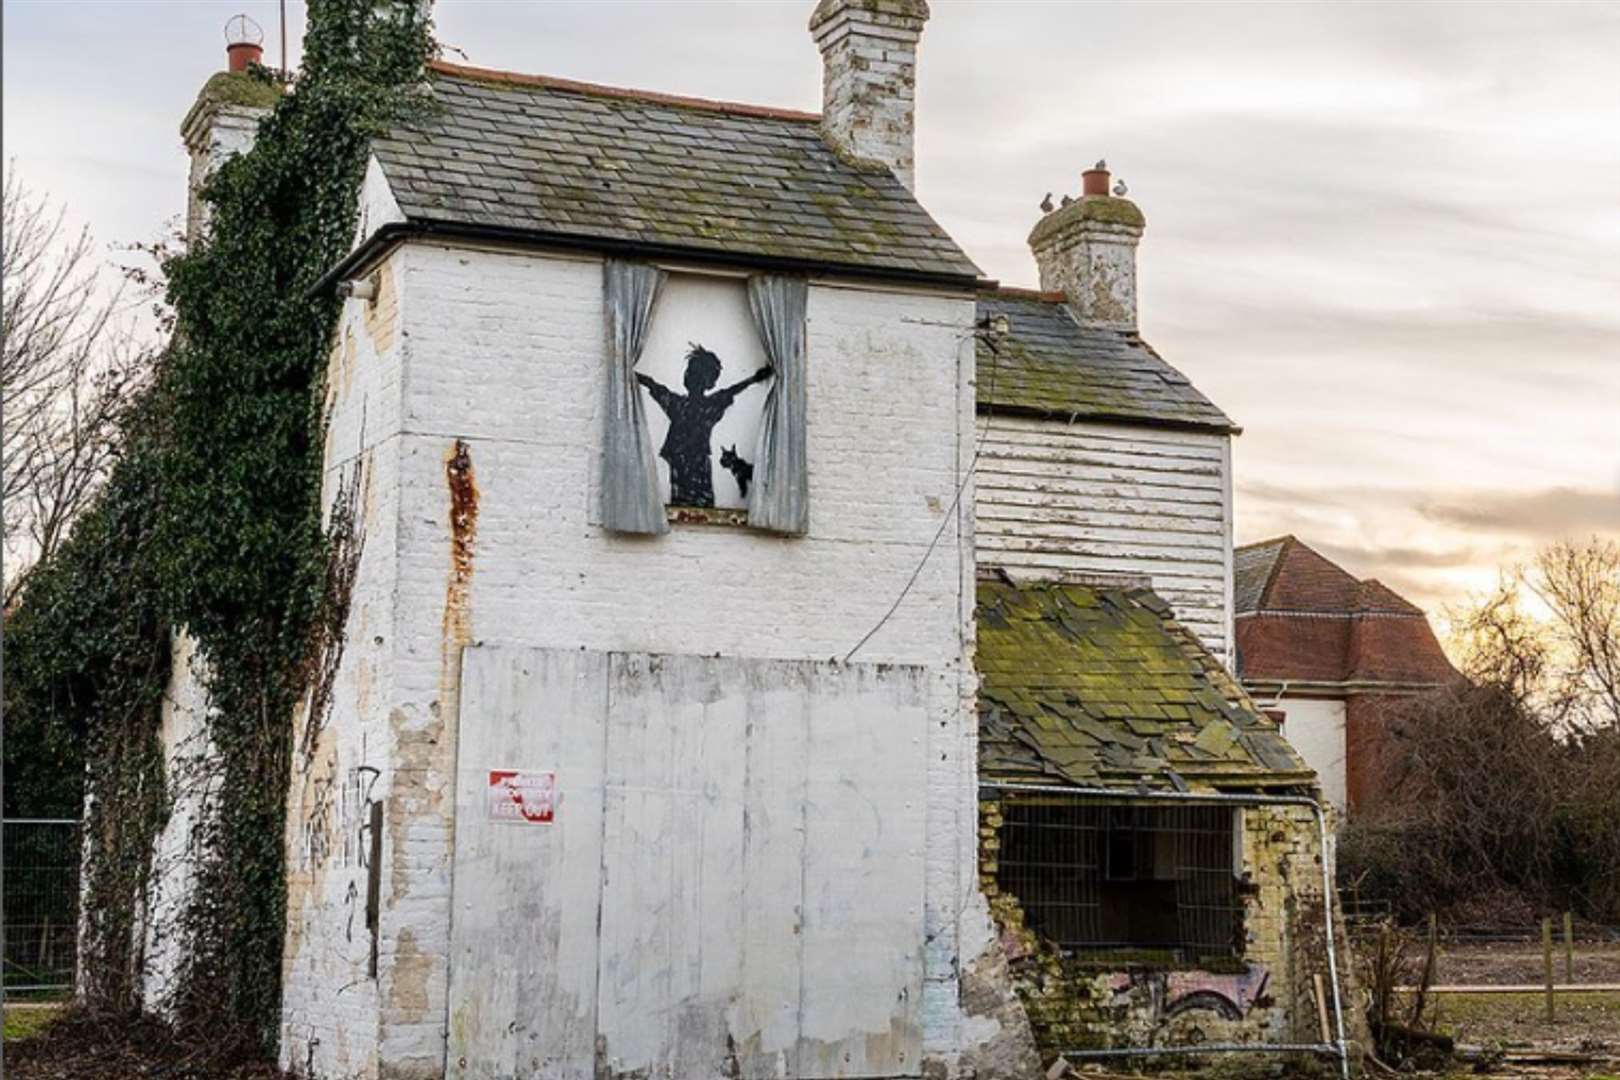 Banksy claimed the work shortly after it was demolished. Picture: Banksy/Instagram